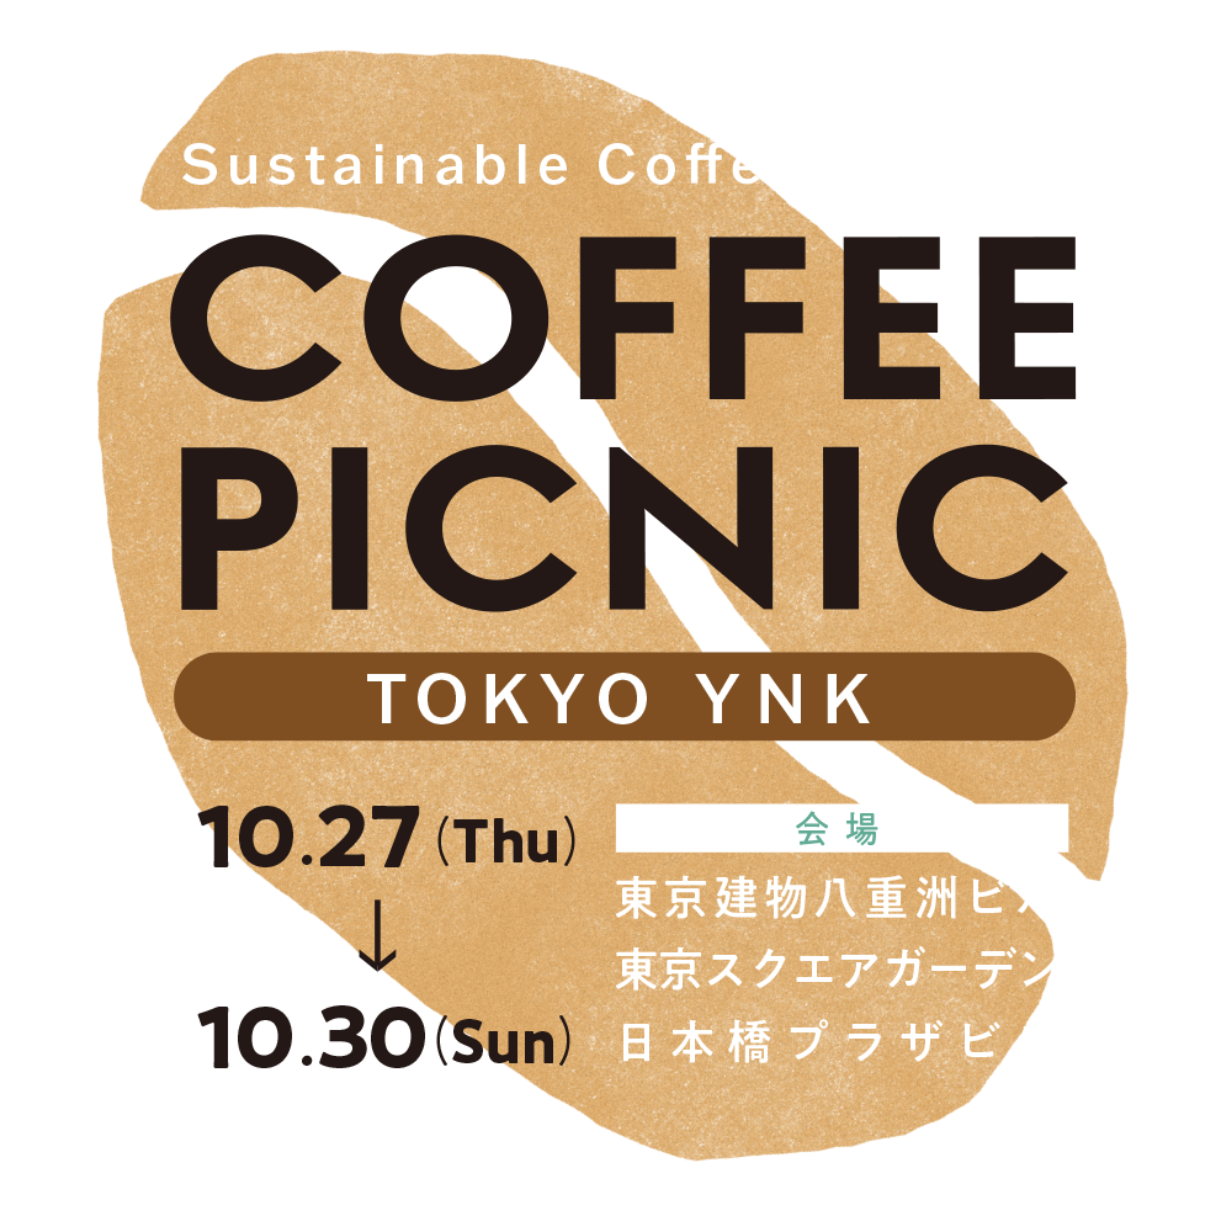 Sustainable Coffee For You COFFEE PICNIC | TOKYO YNK